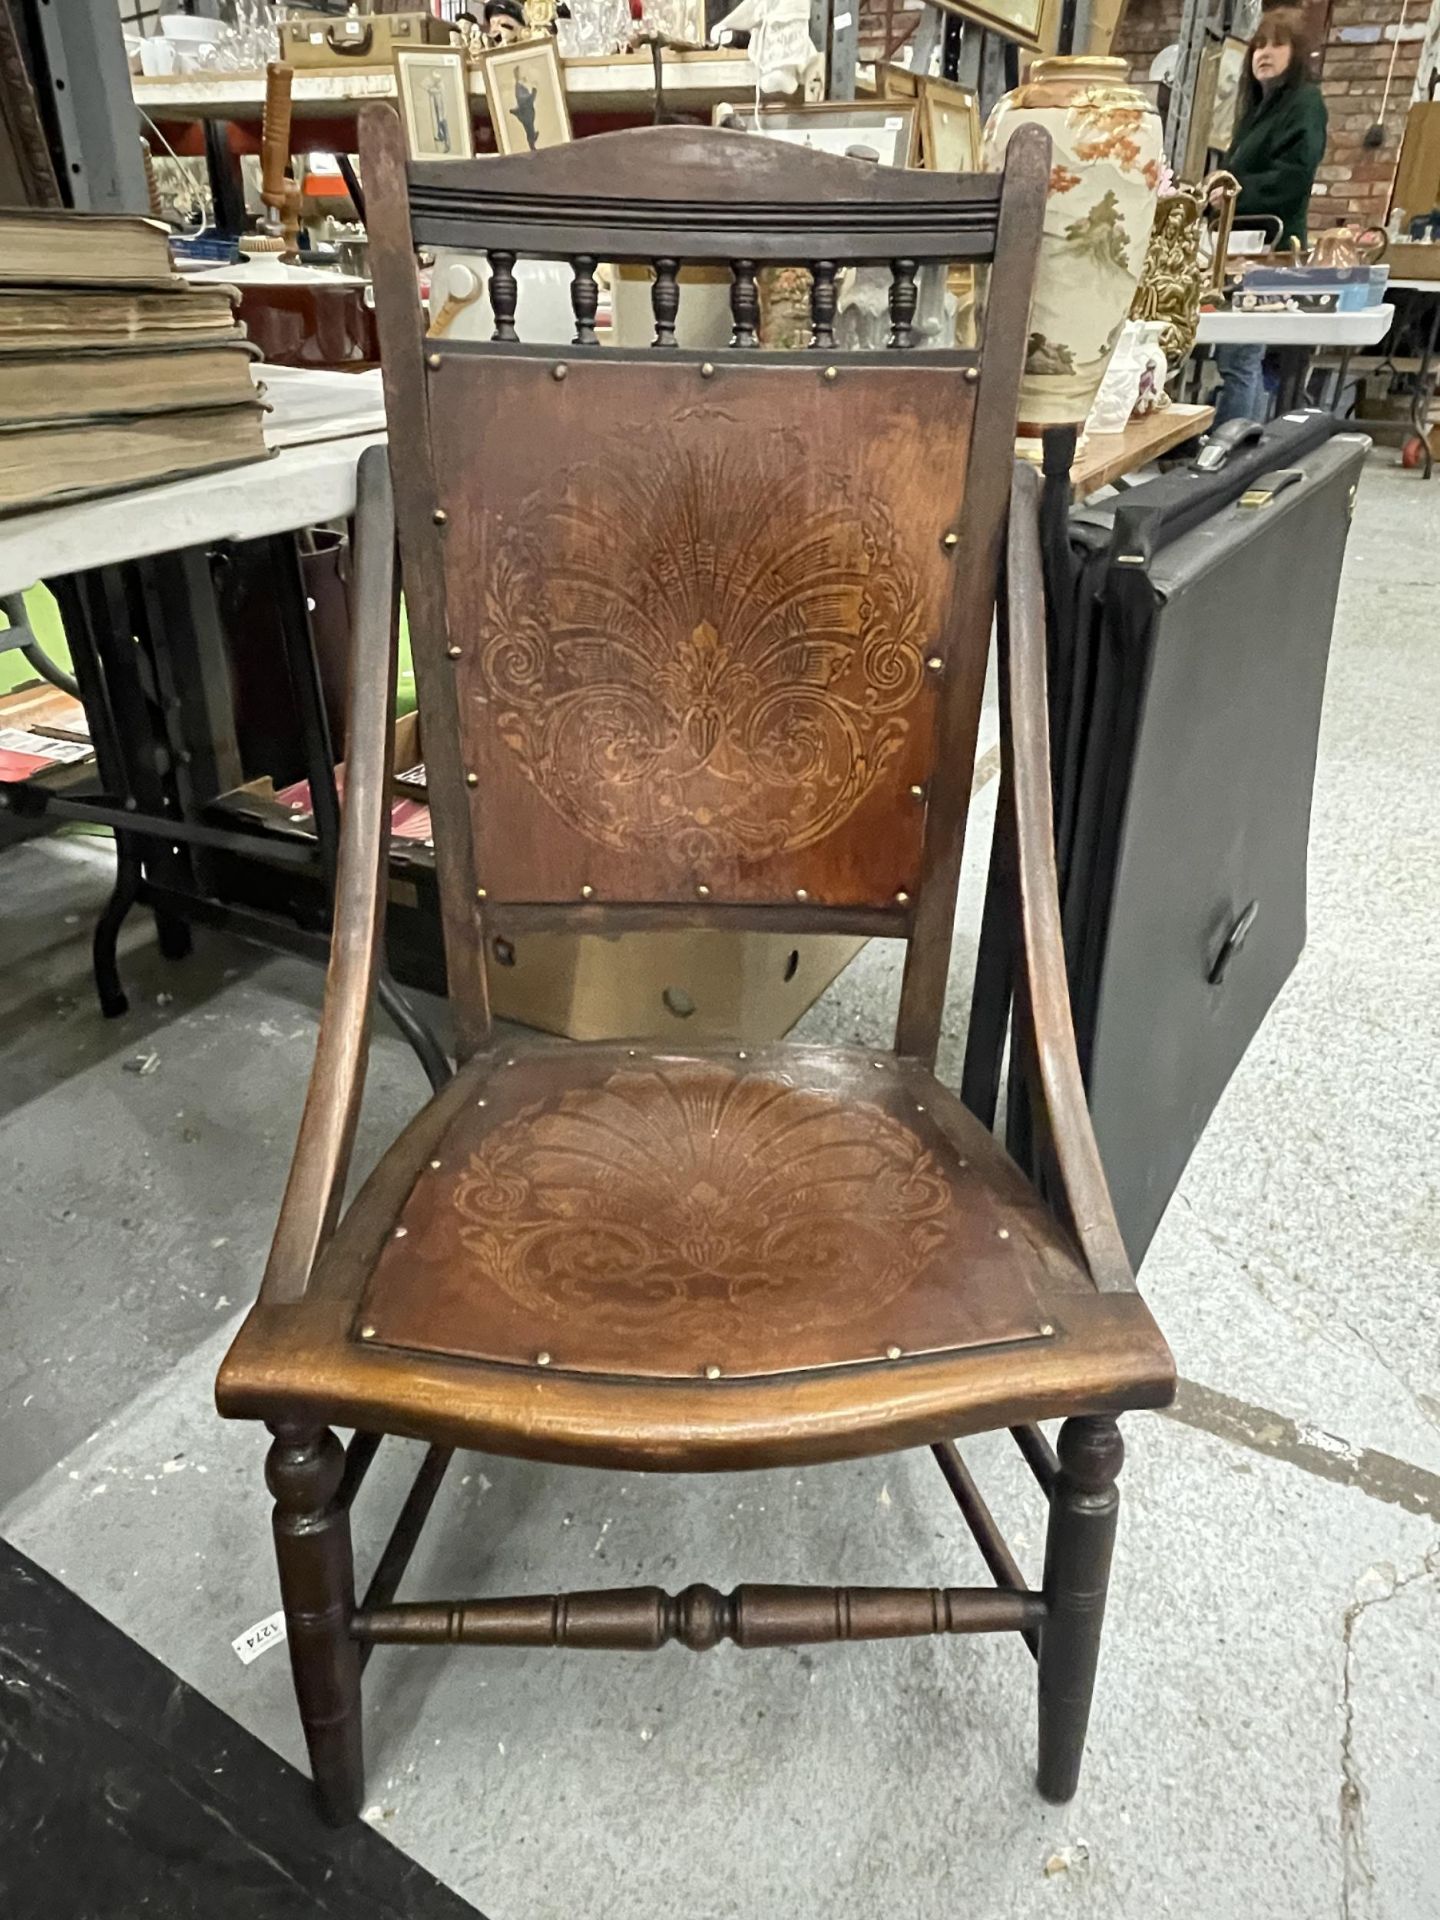 AN ART NOUVEAU CHAIR WITH FLORAL DESIGN SEAT AND BACK